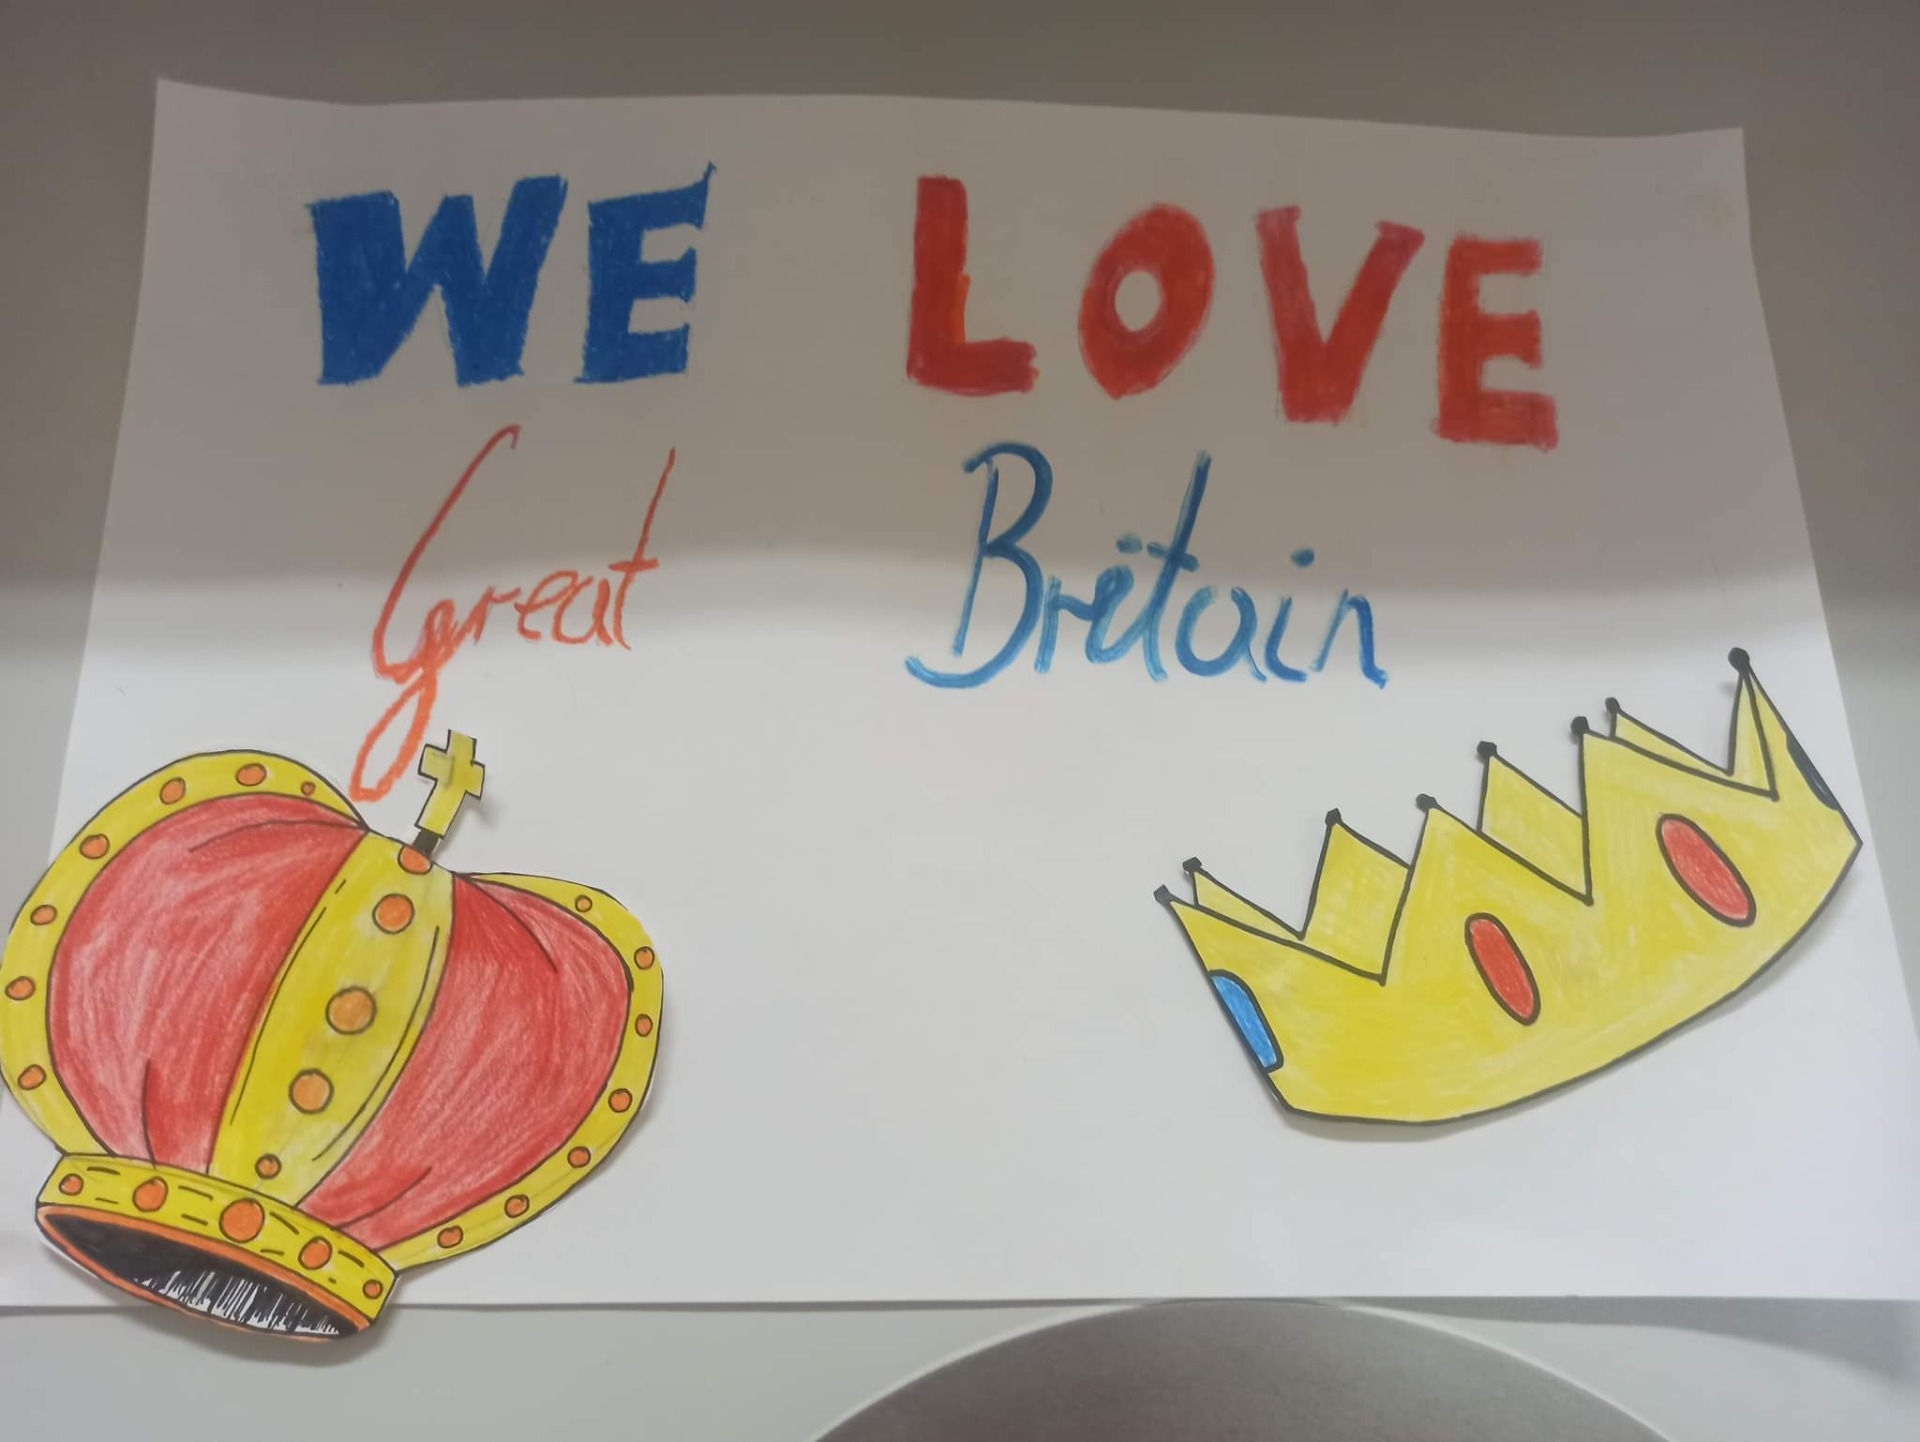 We love Great Britain 🥰🥰 Class 8 celebrate International Foreign Languages Day 💂 - Obrazek 6